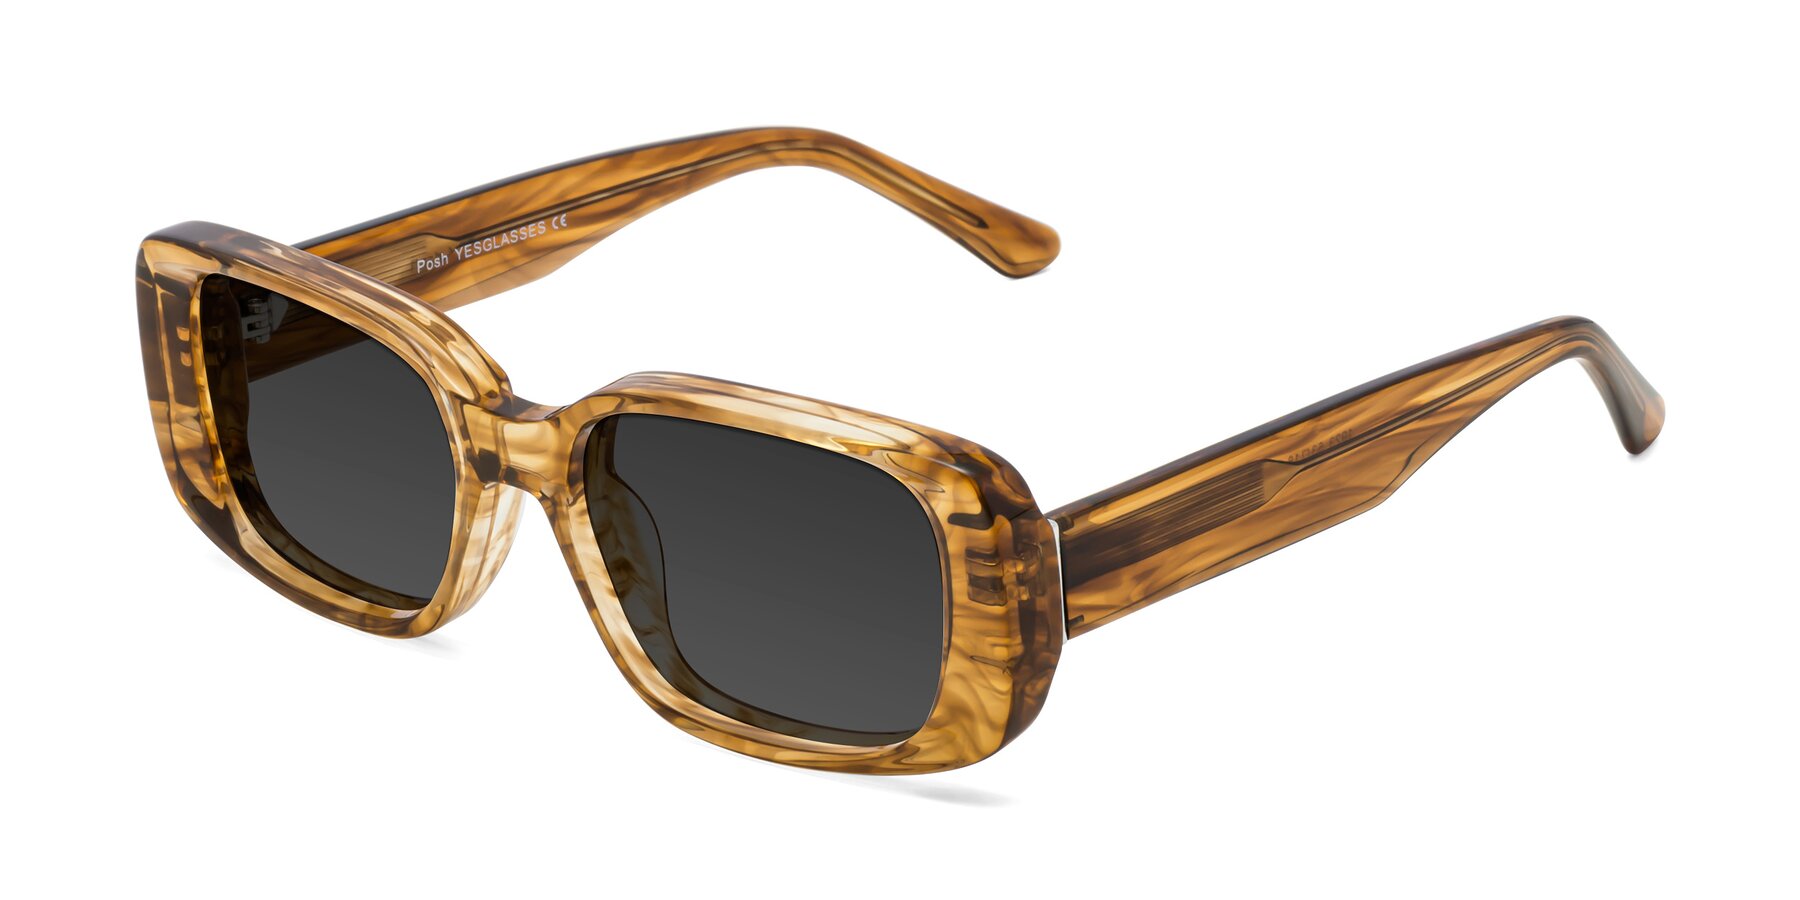 Angle of Posh in Stripe Amber with Gray Tinted Lenses